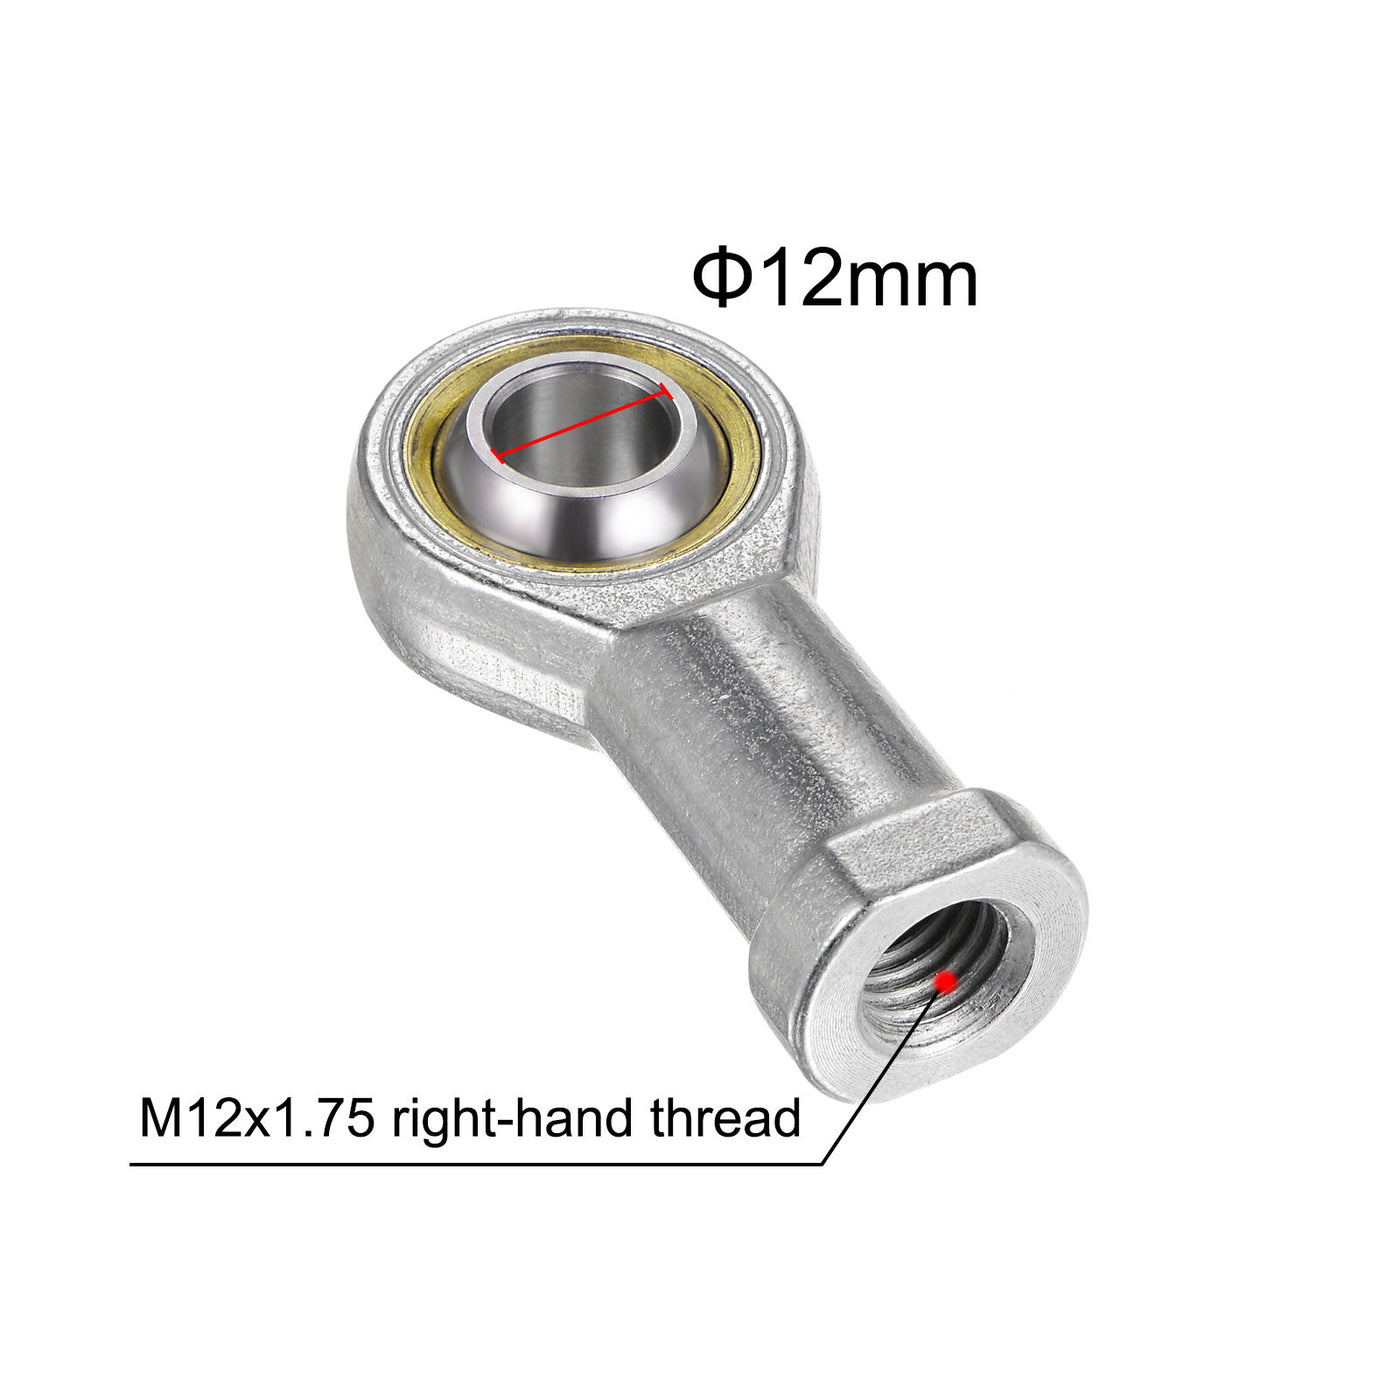 uxcell Uxcell 4pcs SI12TK PHSA12 M12 Female Rod End M12x1.75 Right Hand Thread with Jam Nut